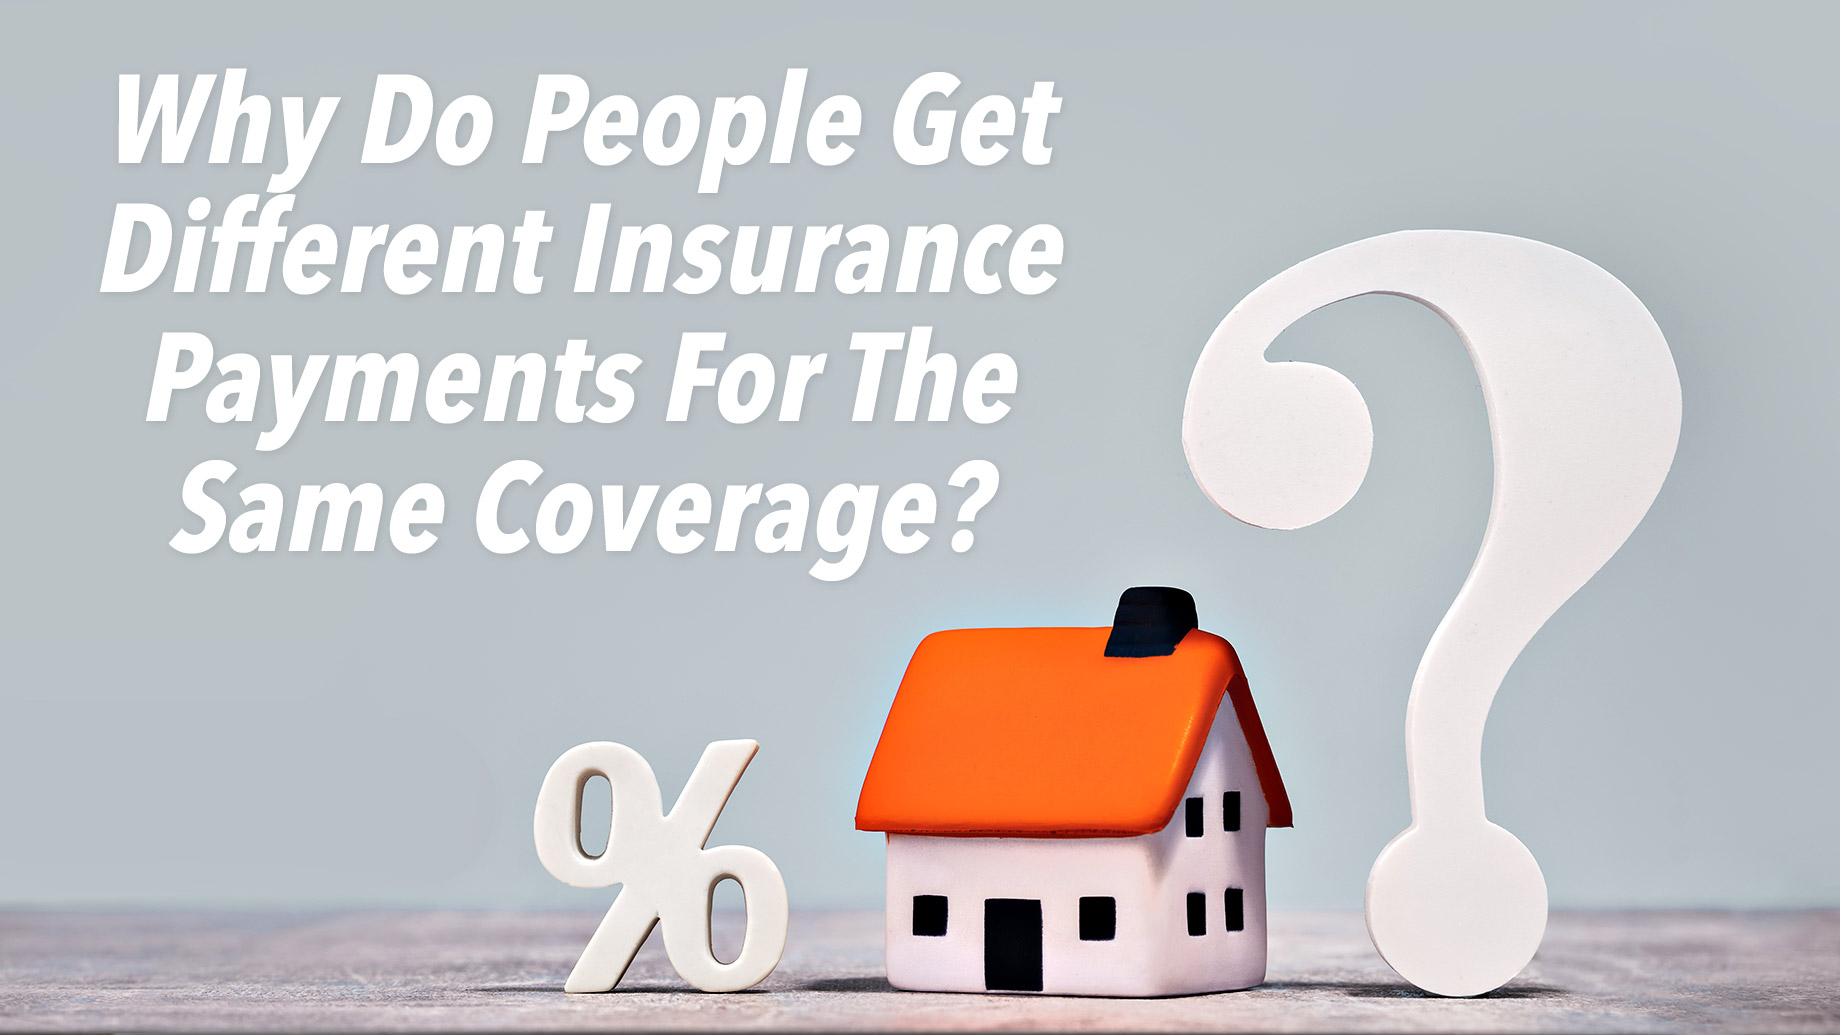 Why Do People Get Different Insurance Payments For The Same Coverage?